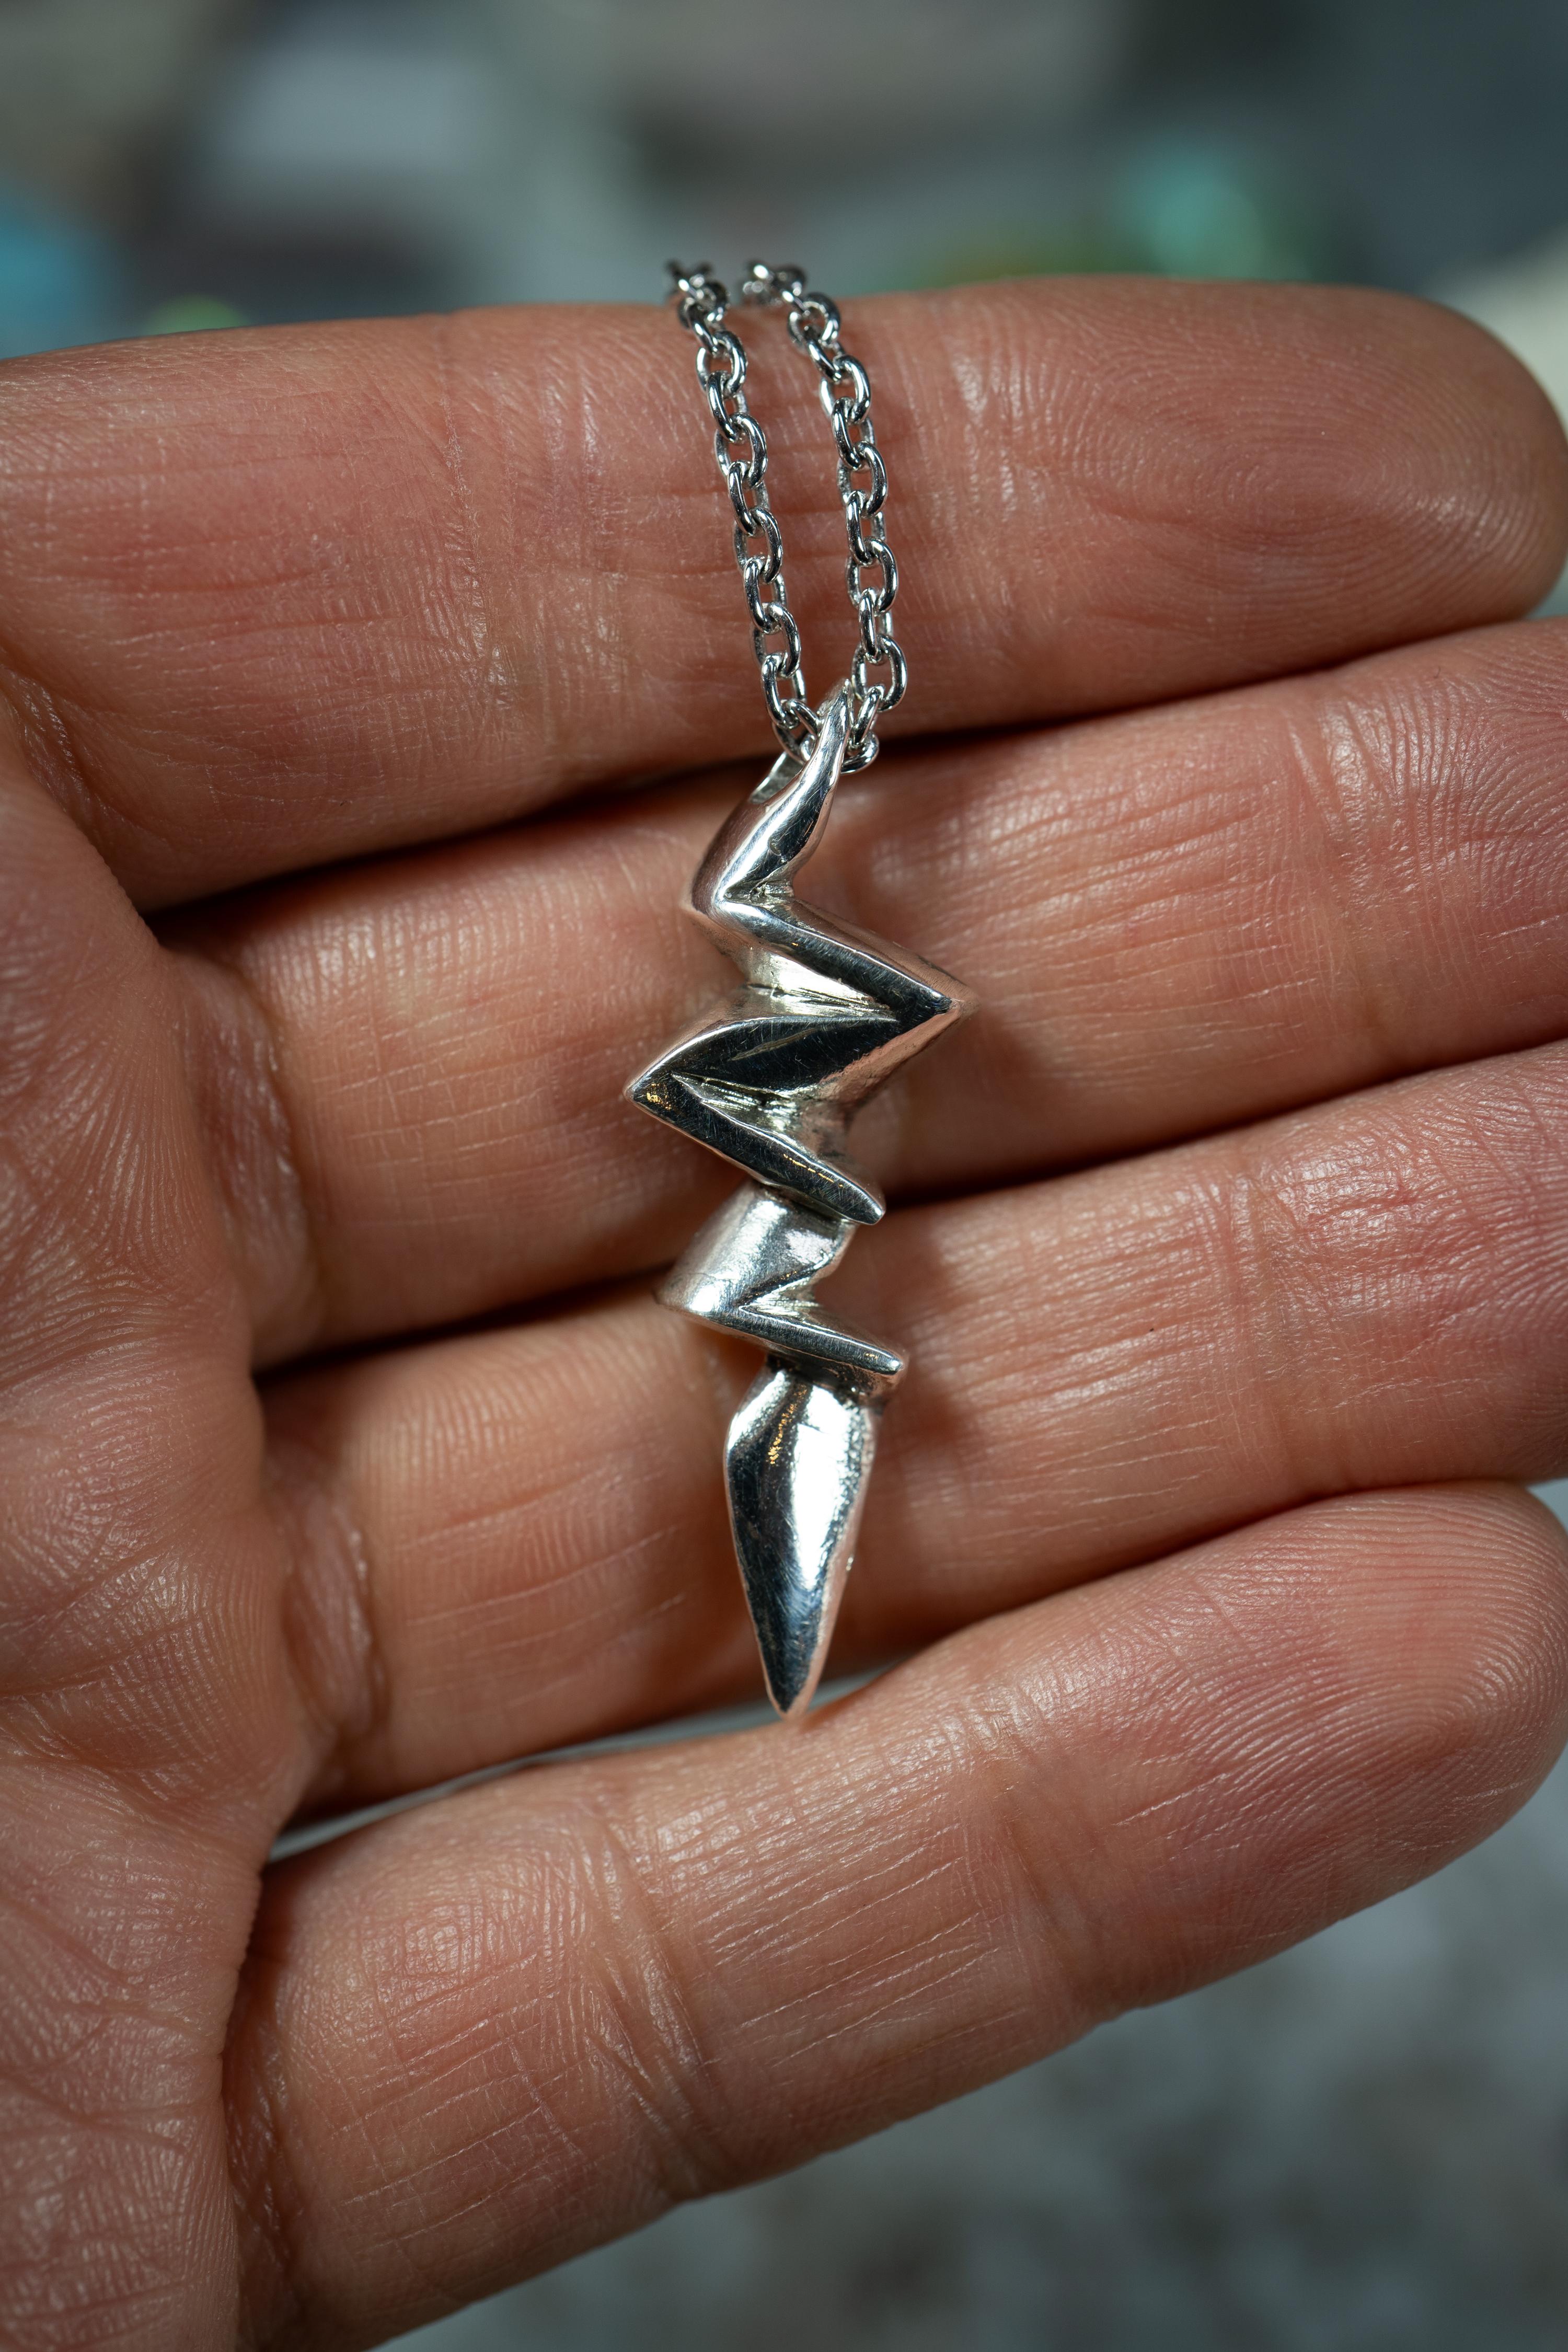 Lightning Bolt pendant by Ken Fury is hand-carved and cast. This pendant symbolizes nature's raw power, beauty, and transformative and illuminating qualities.

Available in 10K Solid White or Yellow Gold. Send a message to specify which one you